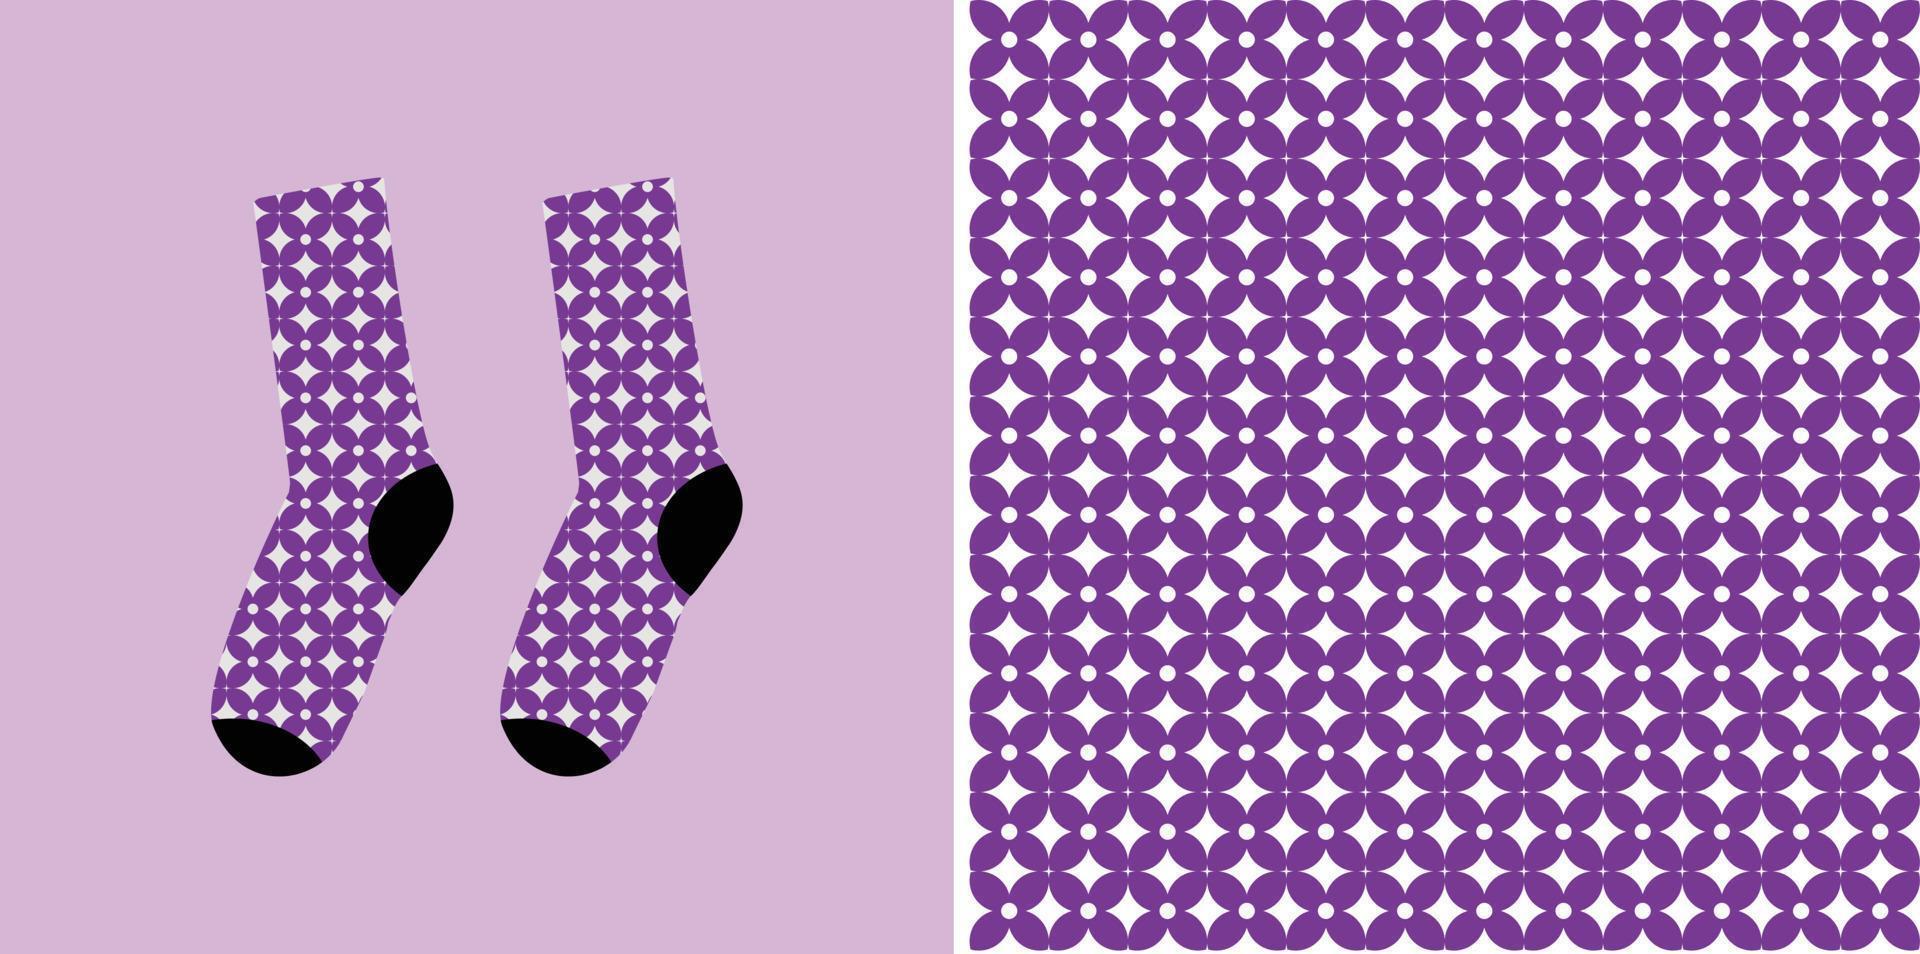 vector illustration of batik pattern with socks mockup and others